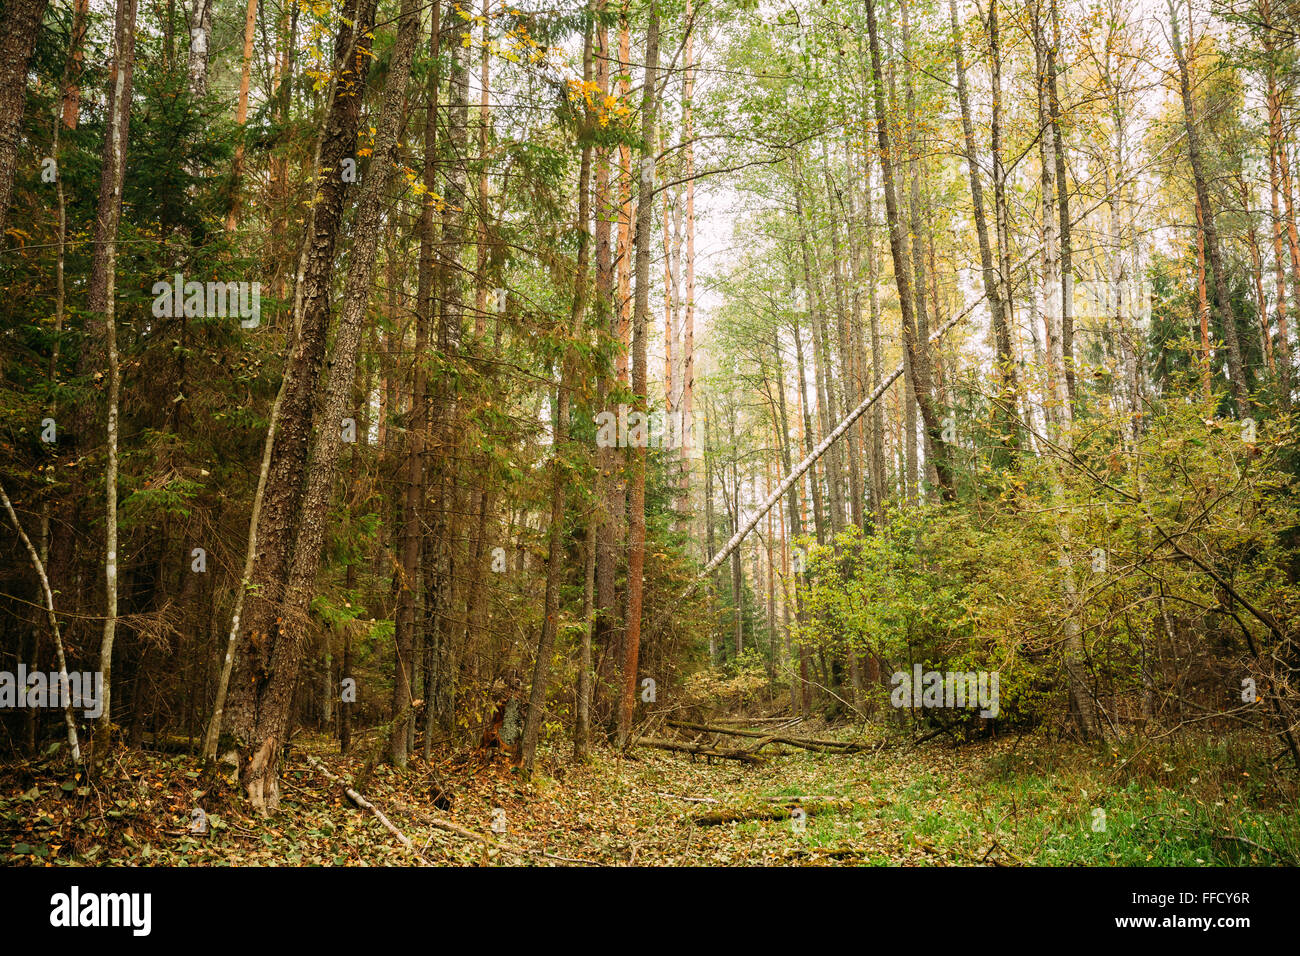 Autumn forest. Fallen trees in coniferous forest reserve. Stock Photo